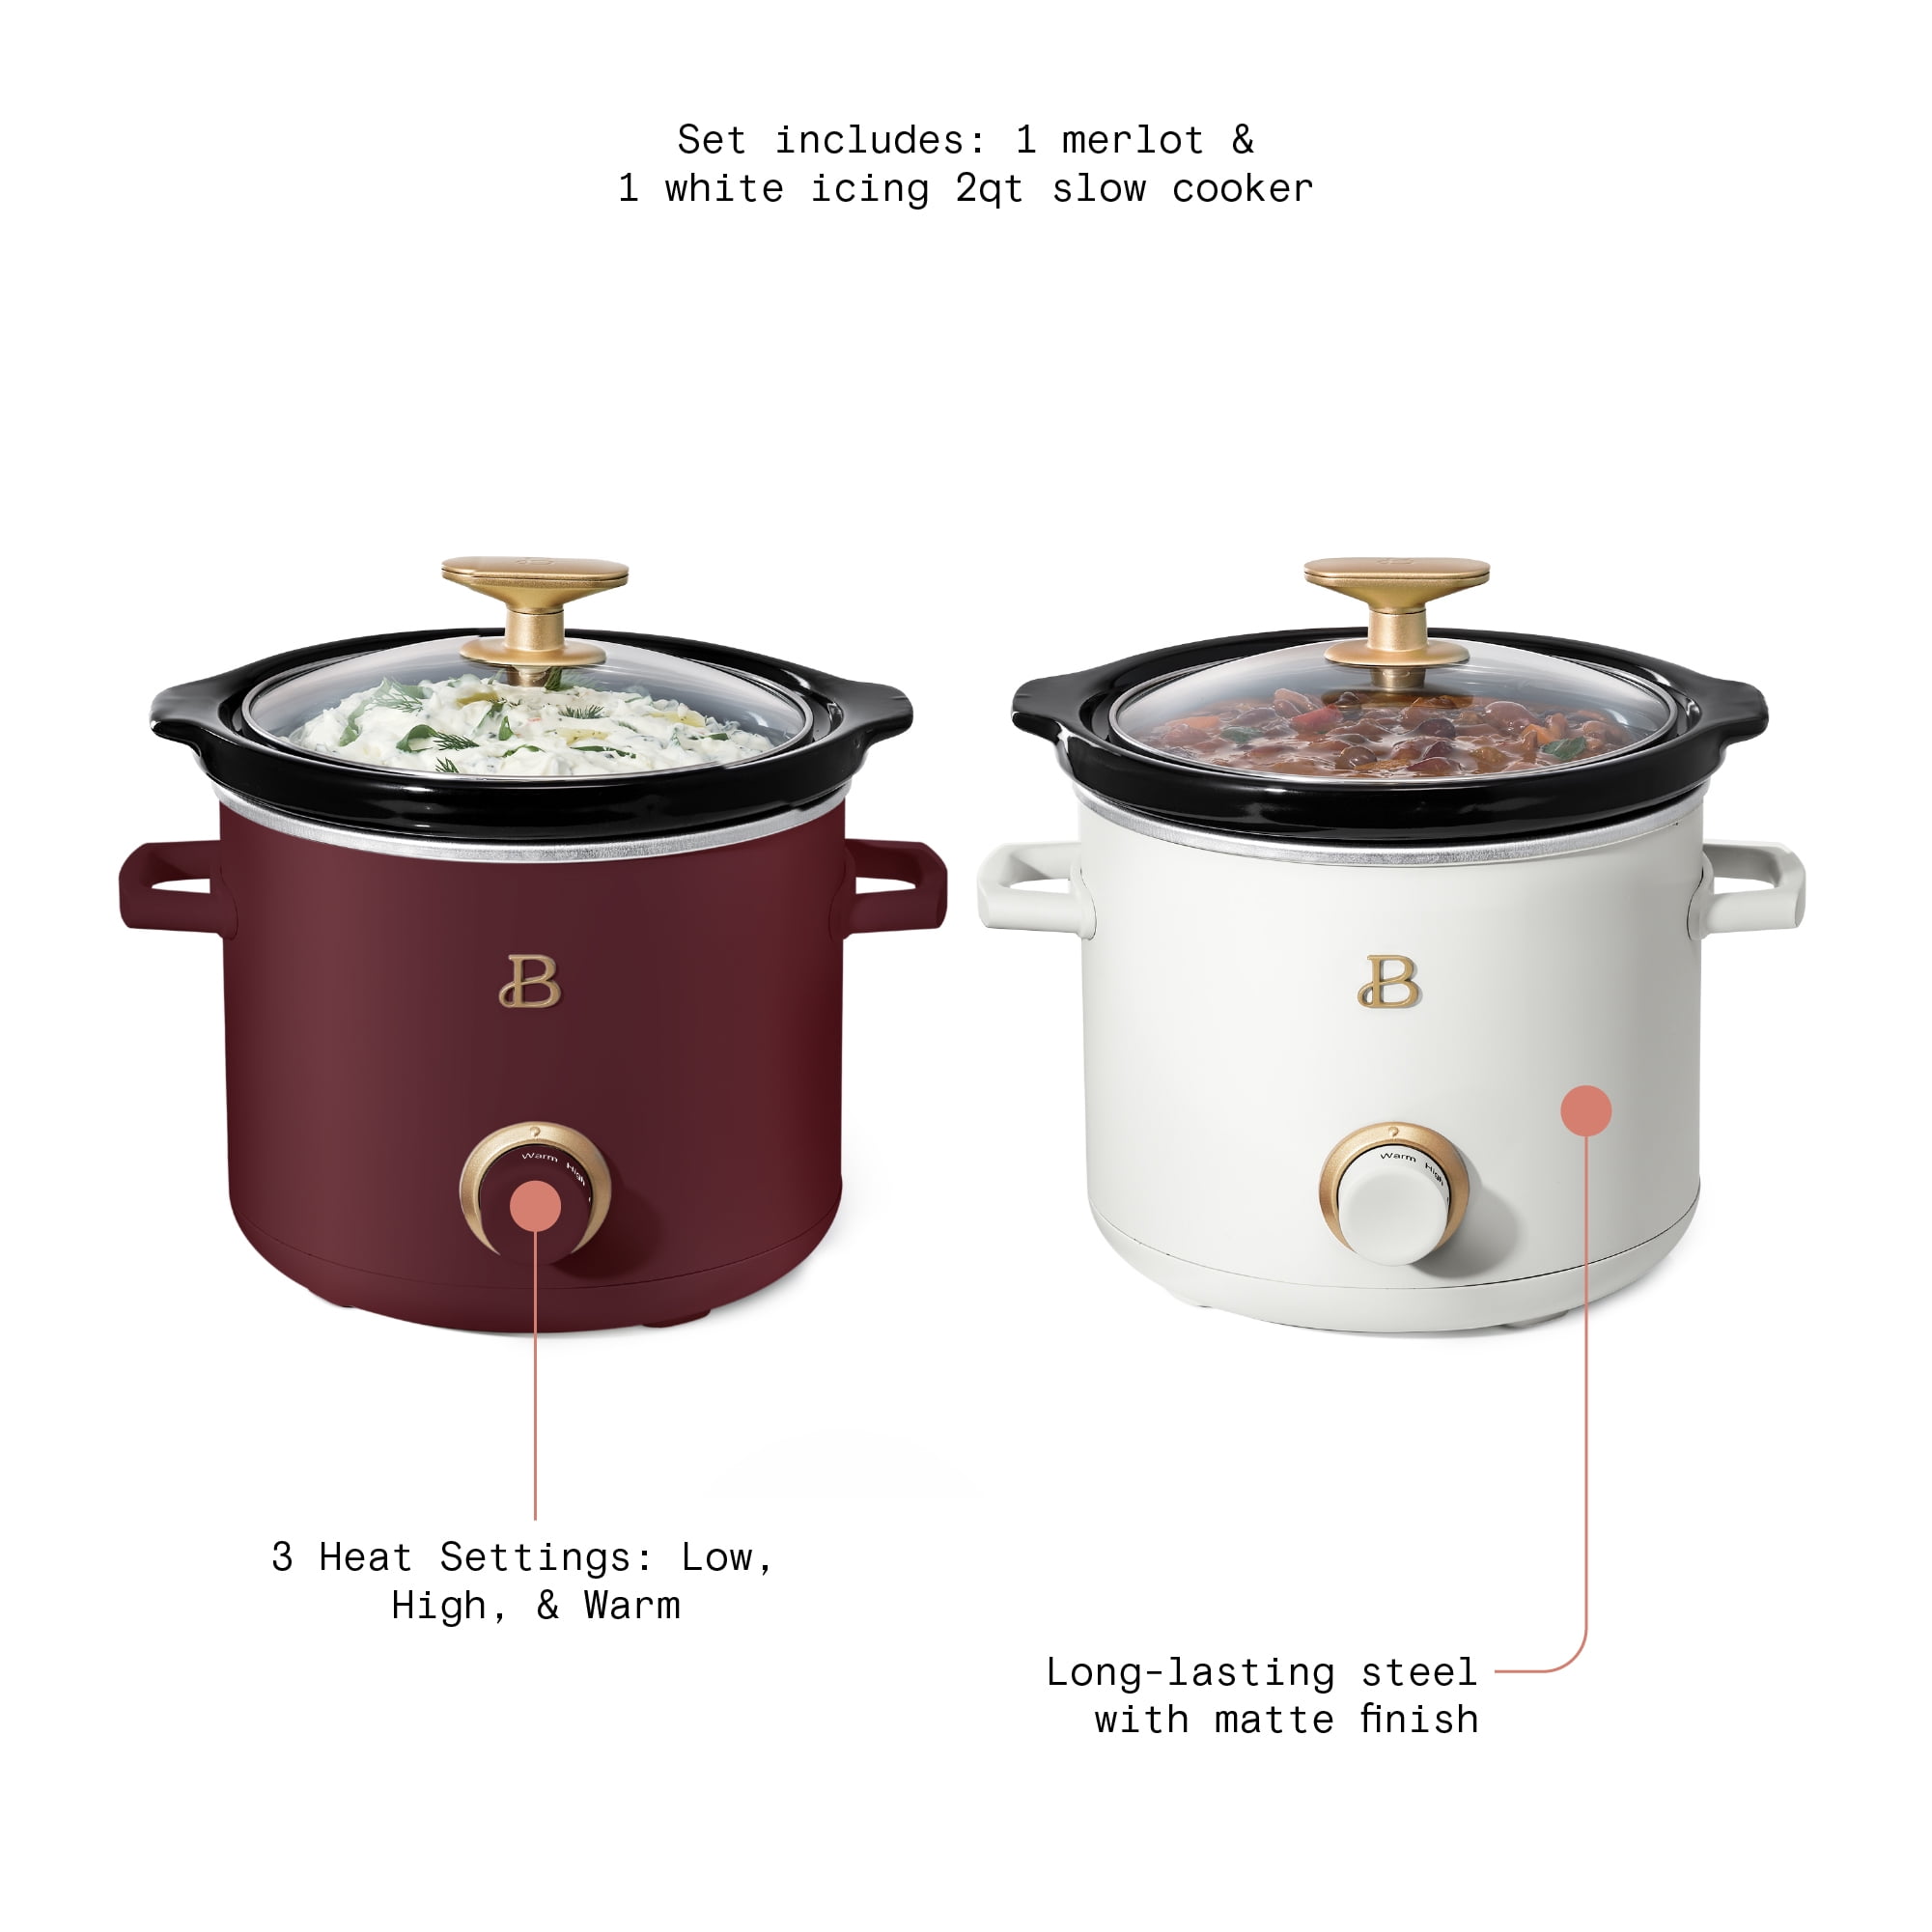 Beautiful 2 qt Slow Cooker Set, 2-Pack, White Icing and Merlot by Drew  Barrymore, 19340, 100 W 